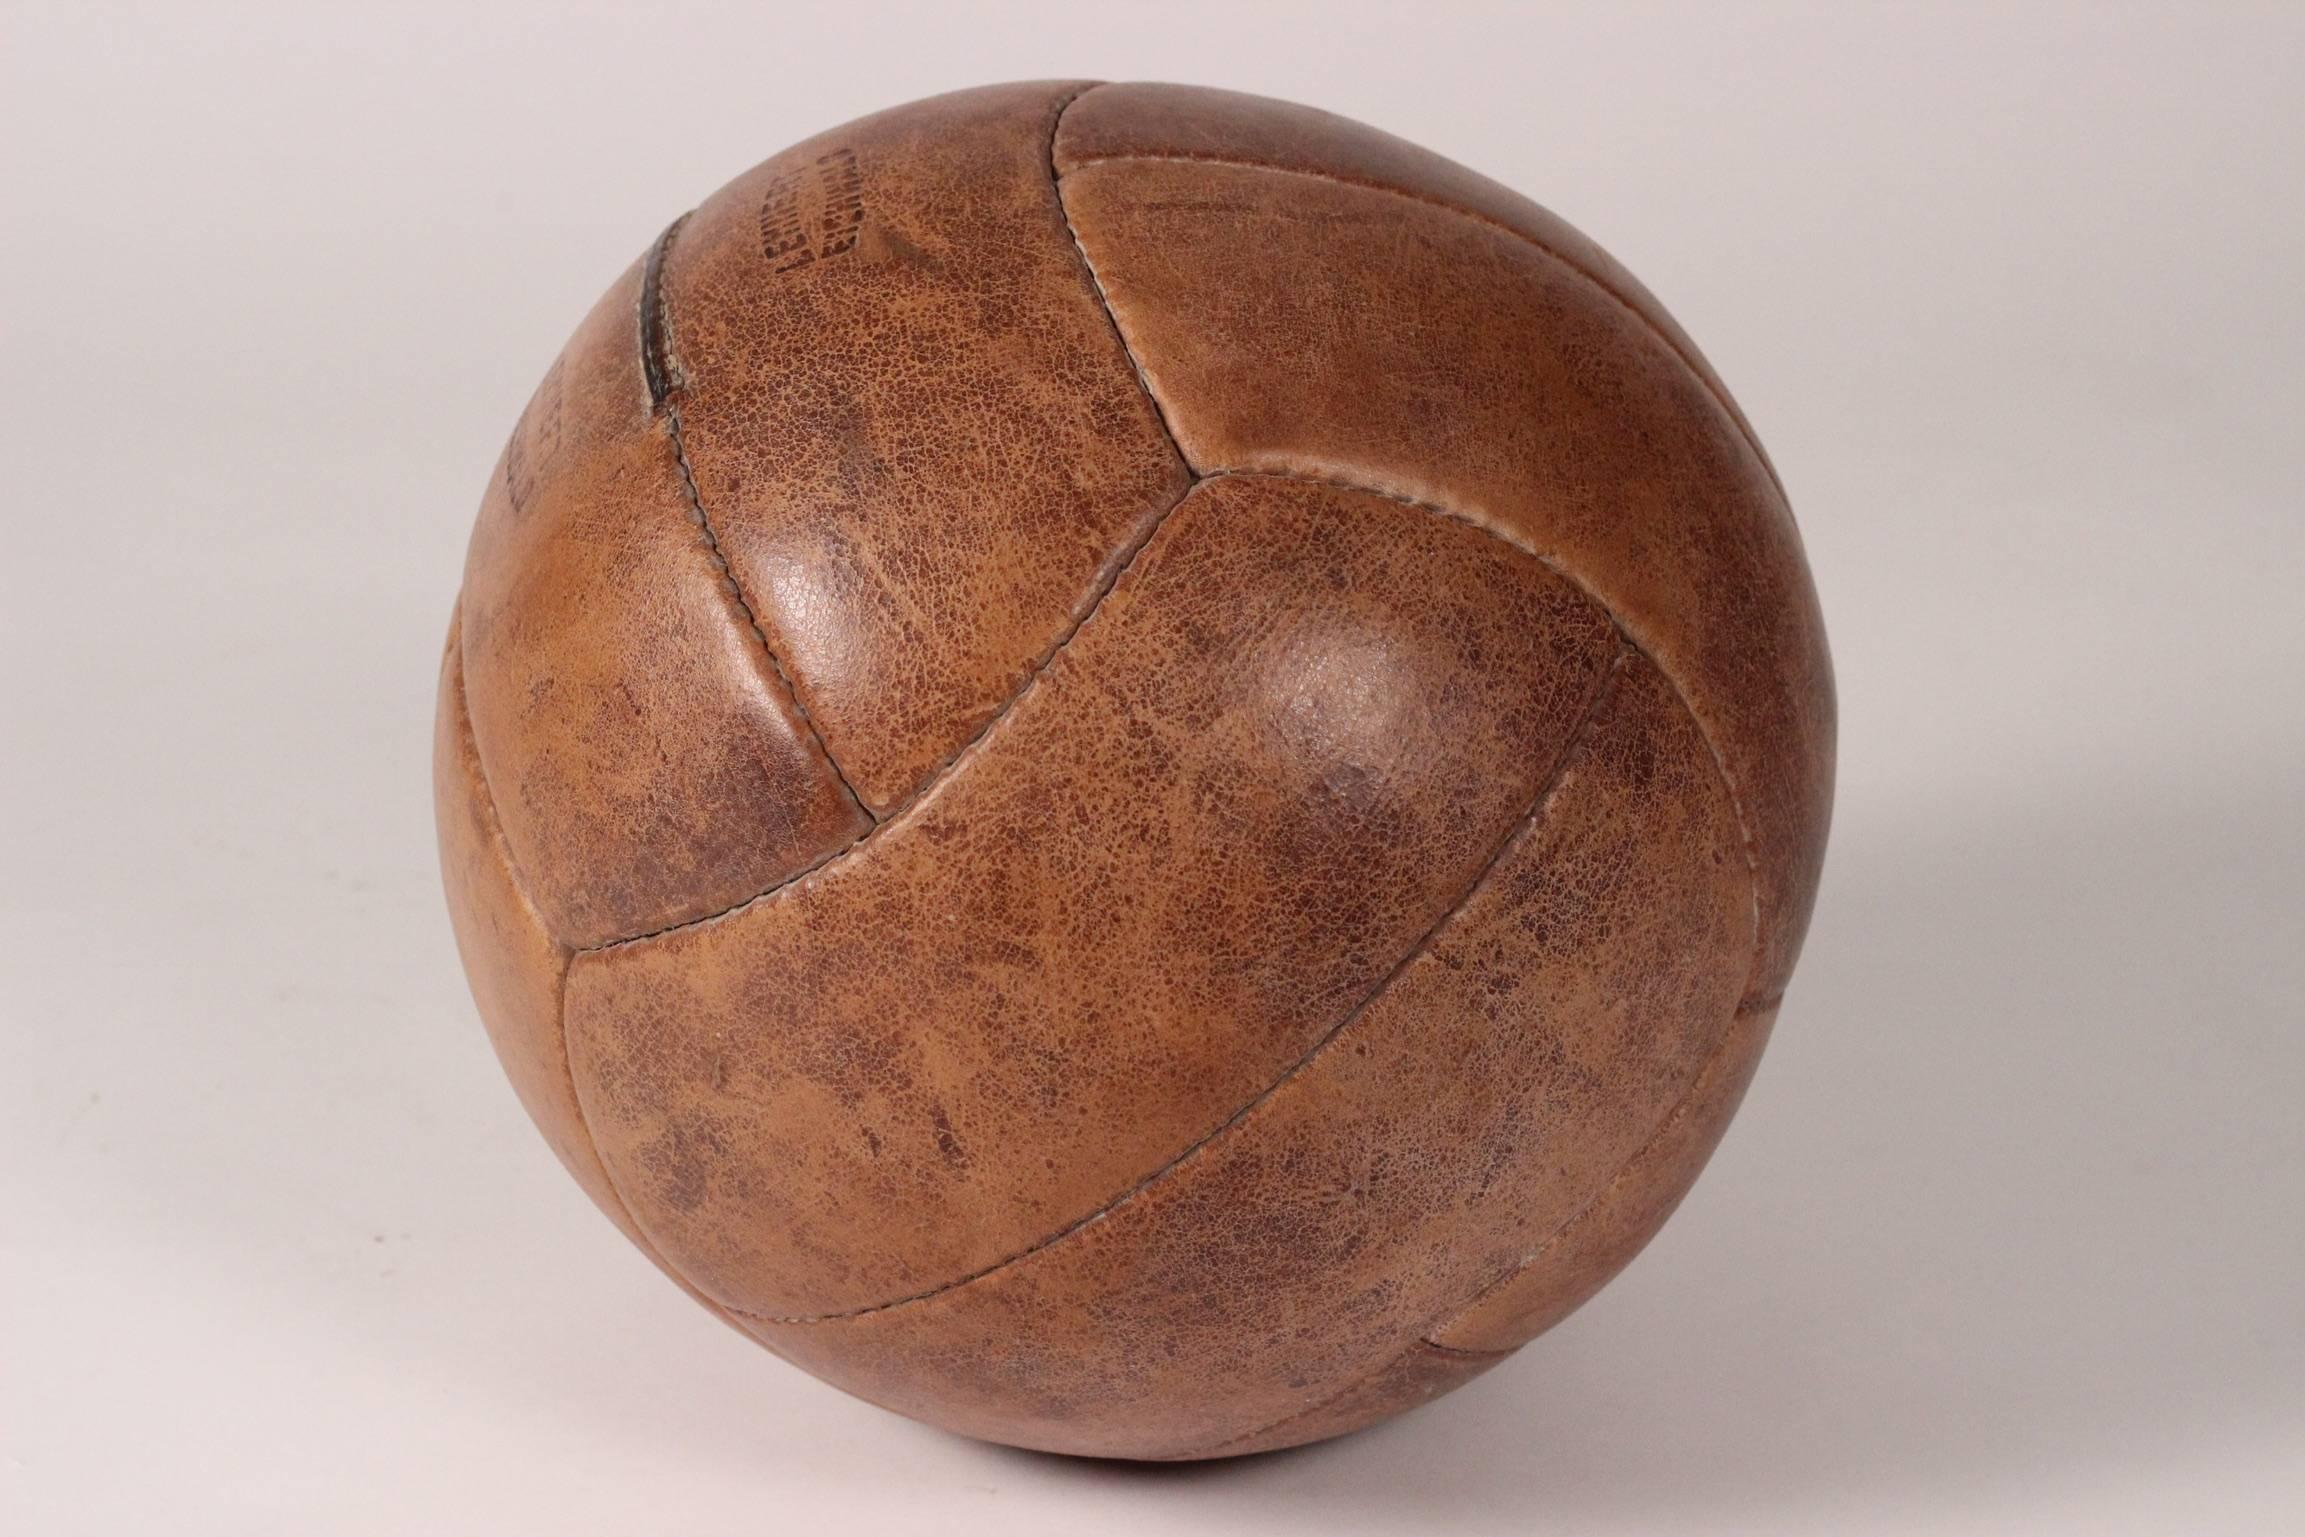 A wonderful vintage medicine ball, showing all the signs of wear of hard gym work through the years.